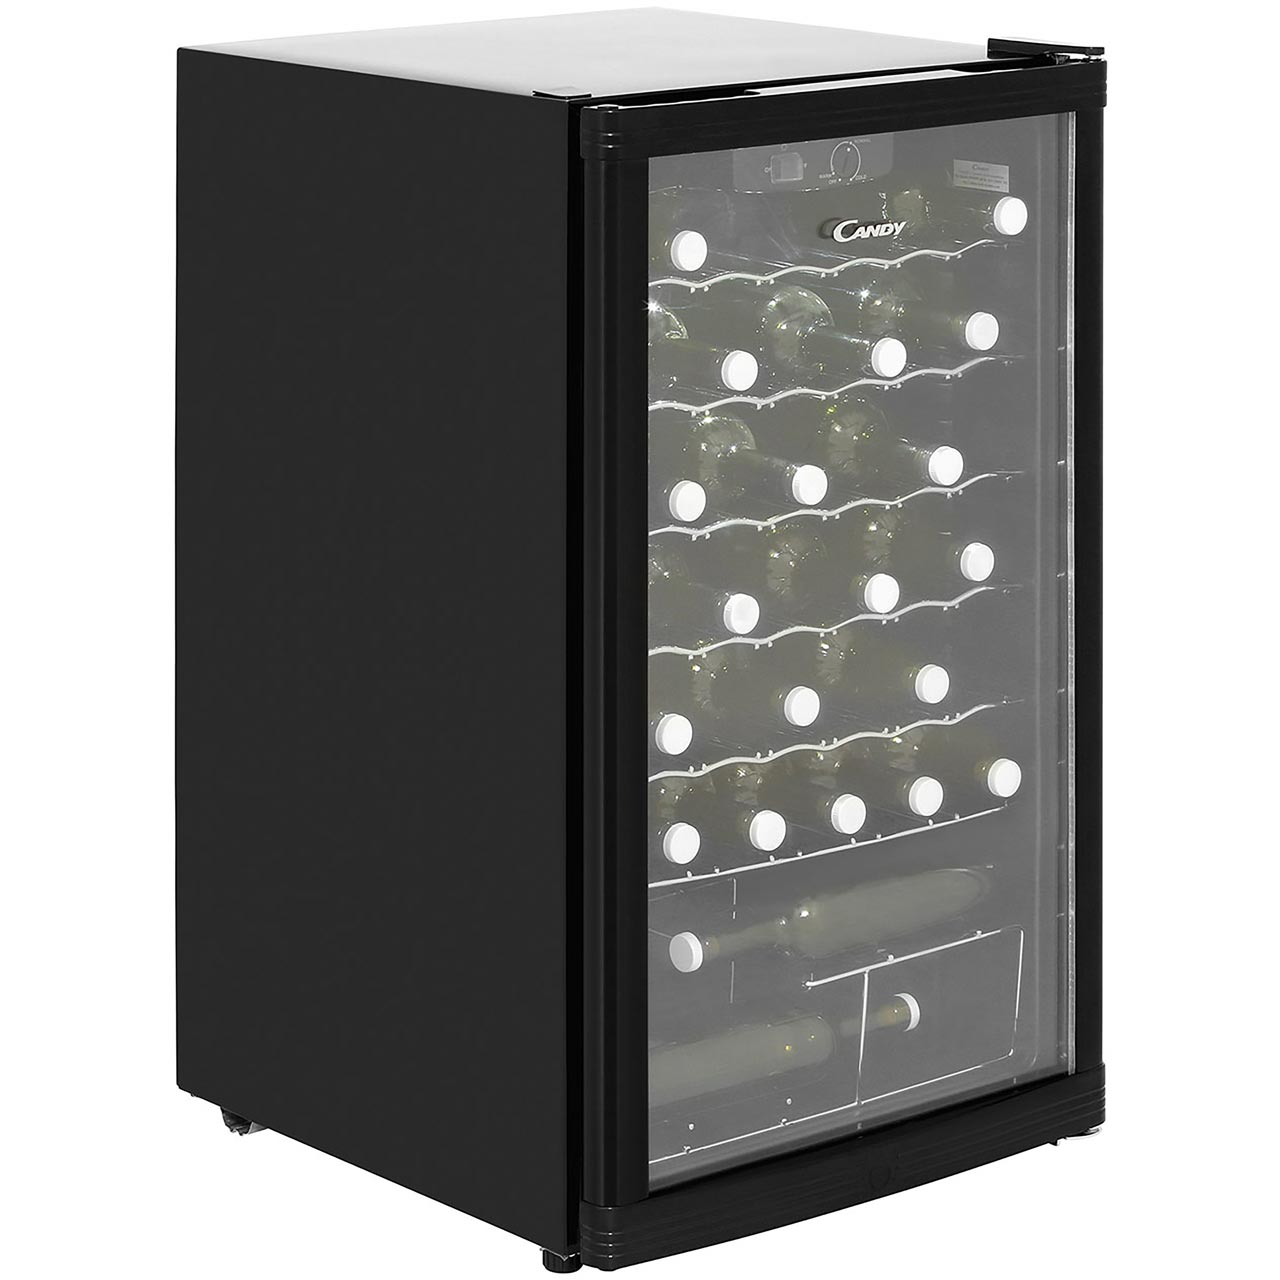 Candy CCV150BL Wine Cooler Review